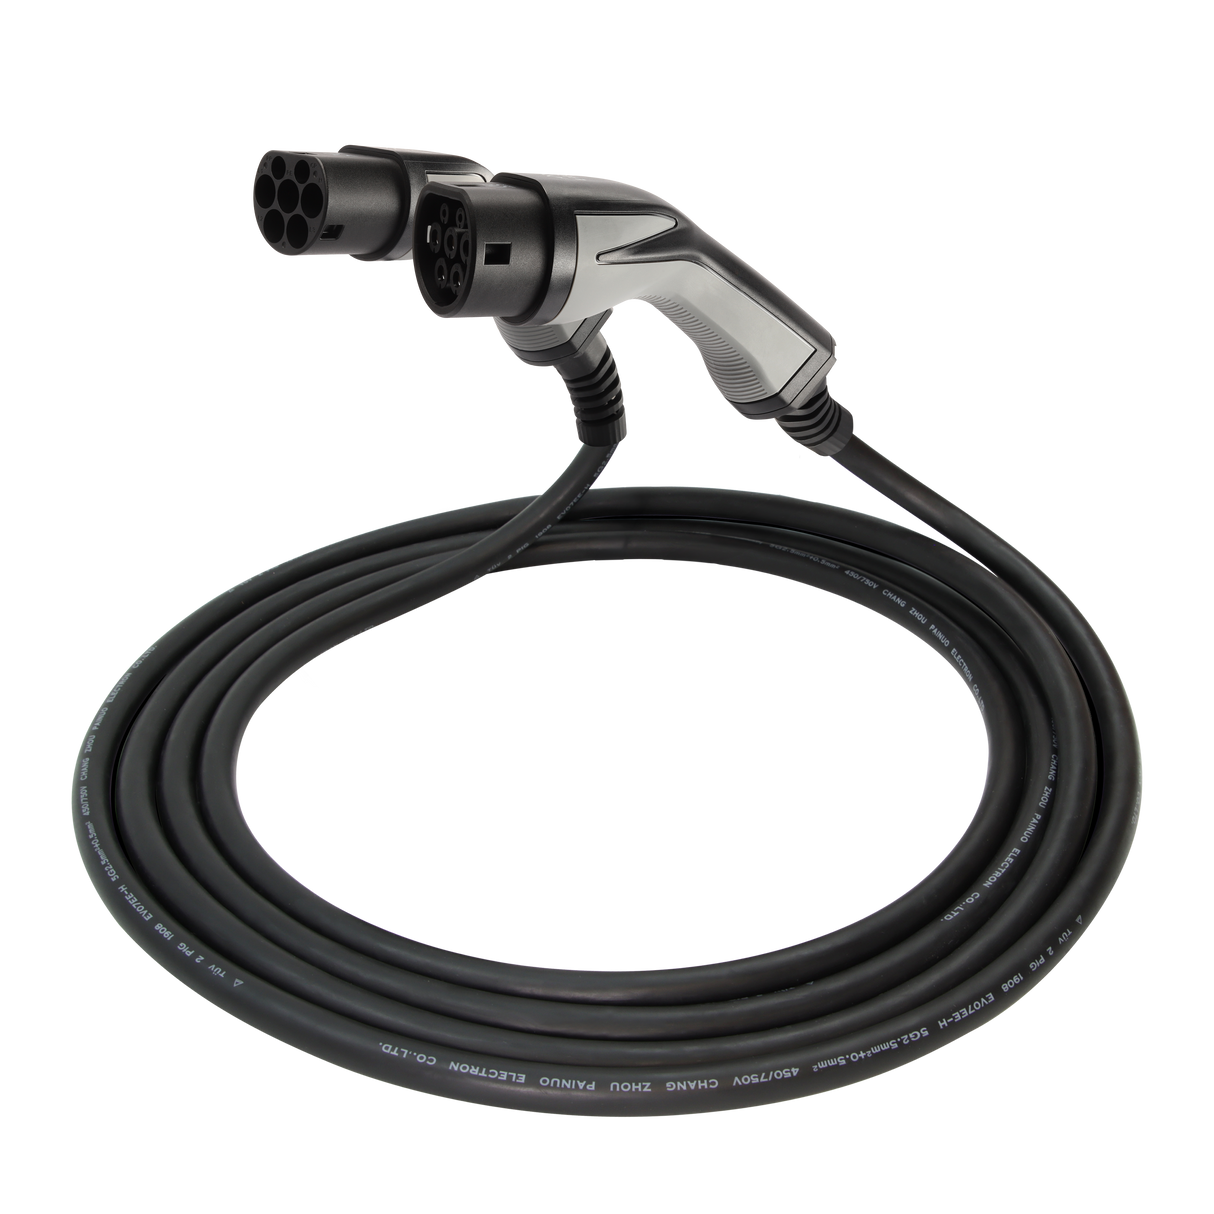 Charging cable Byd Dolphin - Erock Pro Type 2 - 32A 1 phase (7.4 kW)